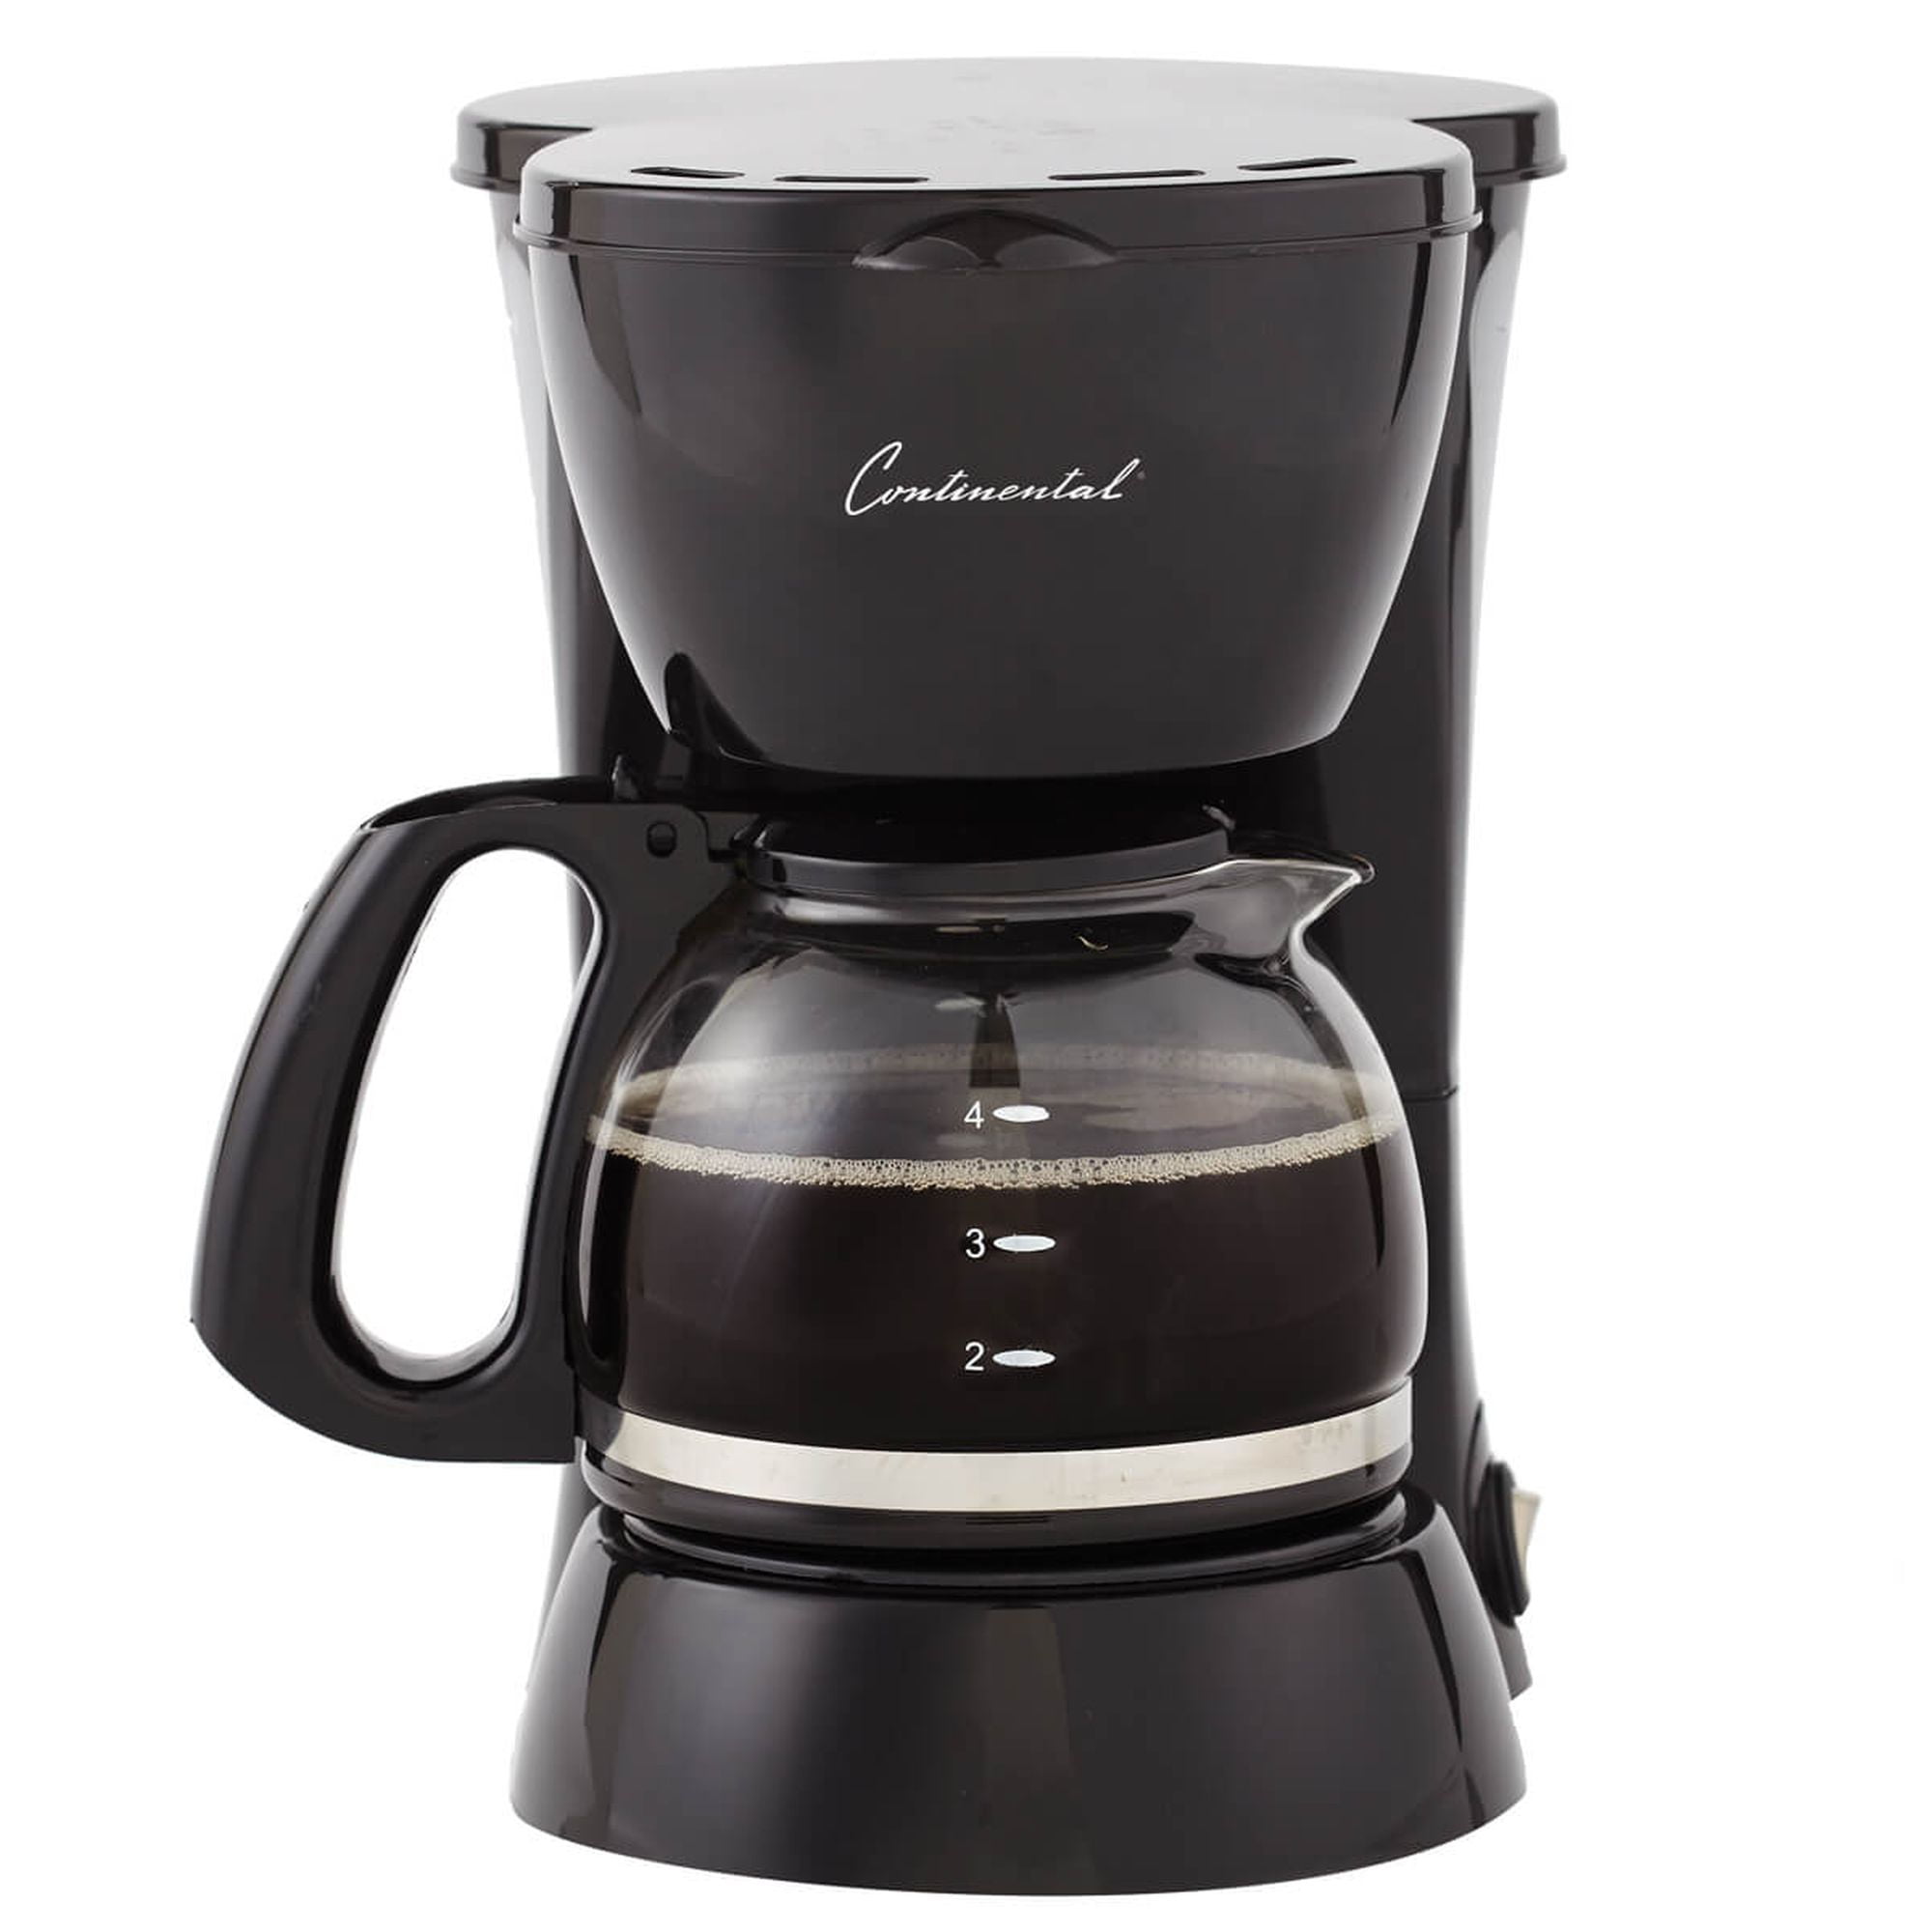  ROLTIN 220V 650W 4-Cups Electric Coffee Maker